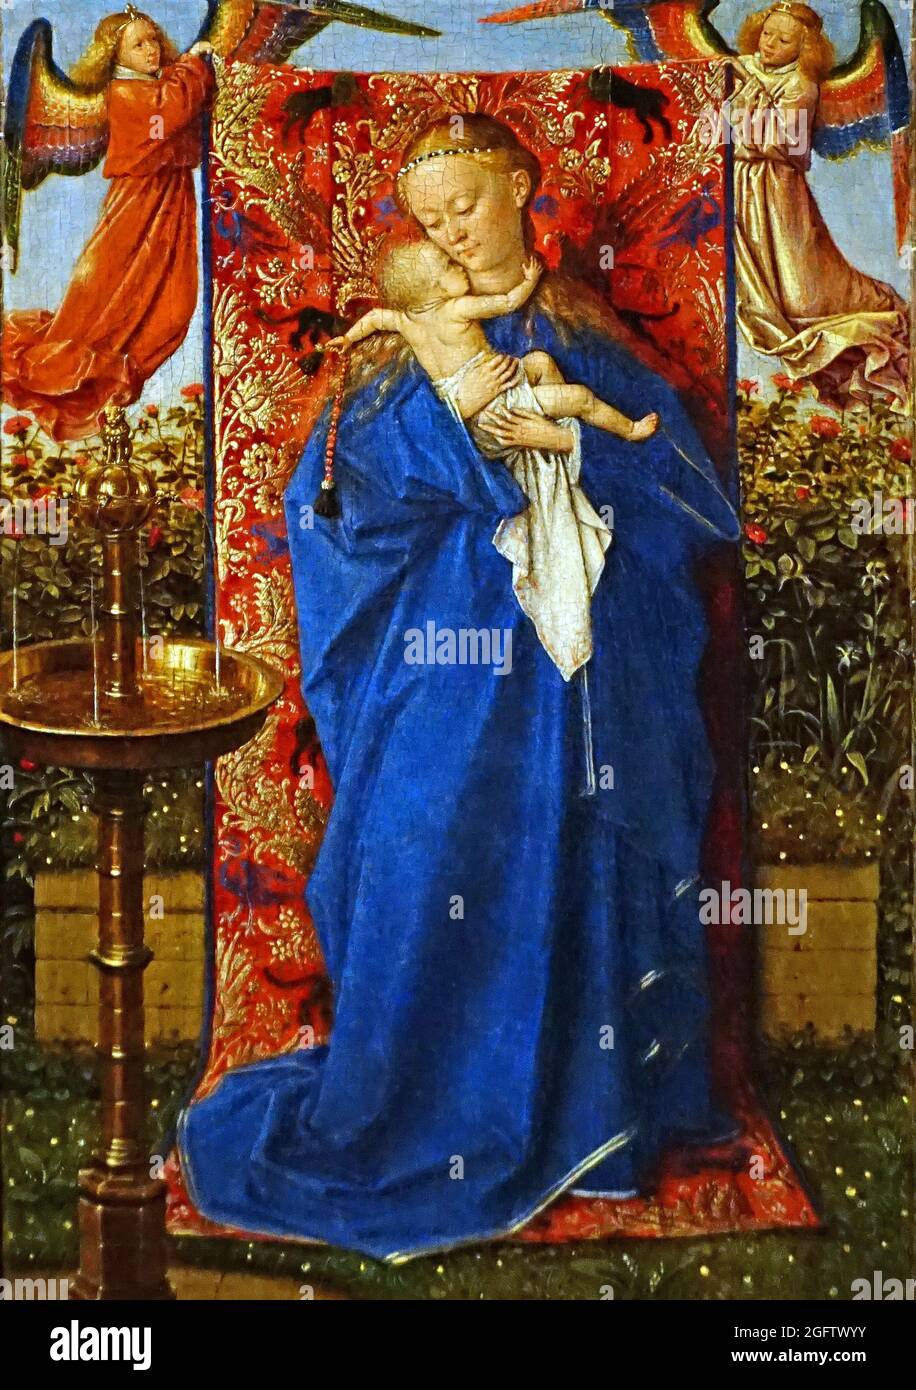 The Madonna at the Fountain,a 1439 oil on panel painting by the early Netherlandish artist Jan van Eyck.(1390-1441) Stock Photo